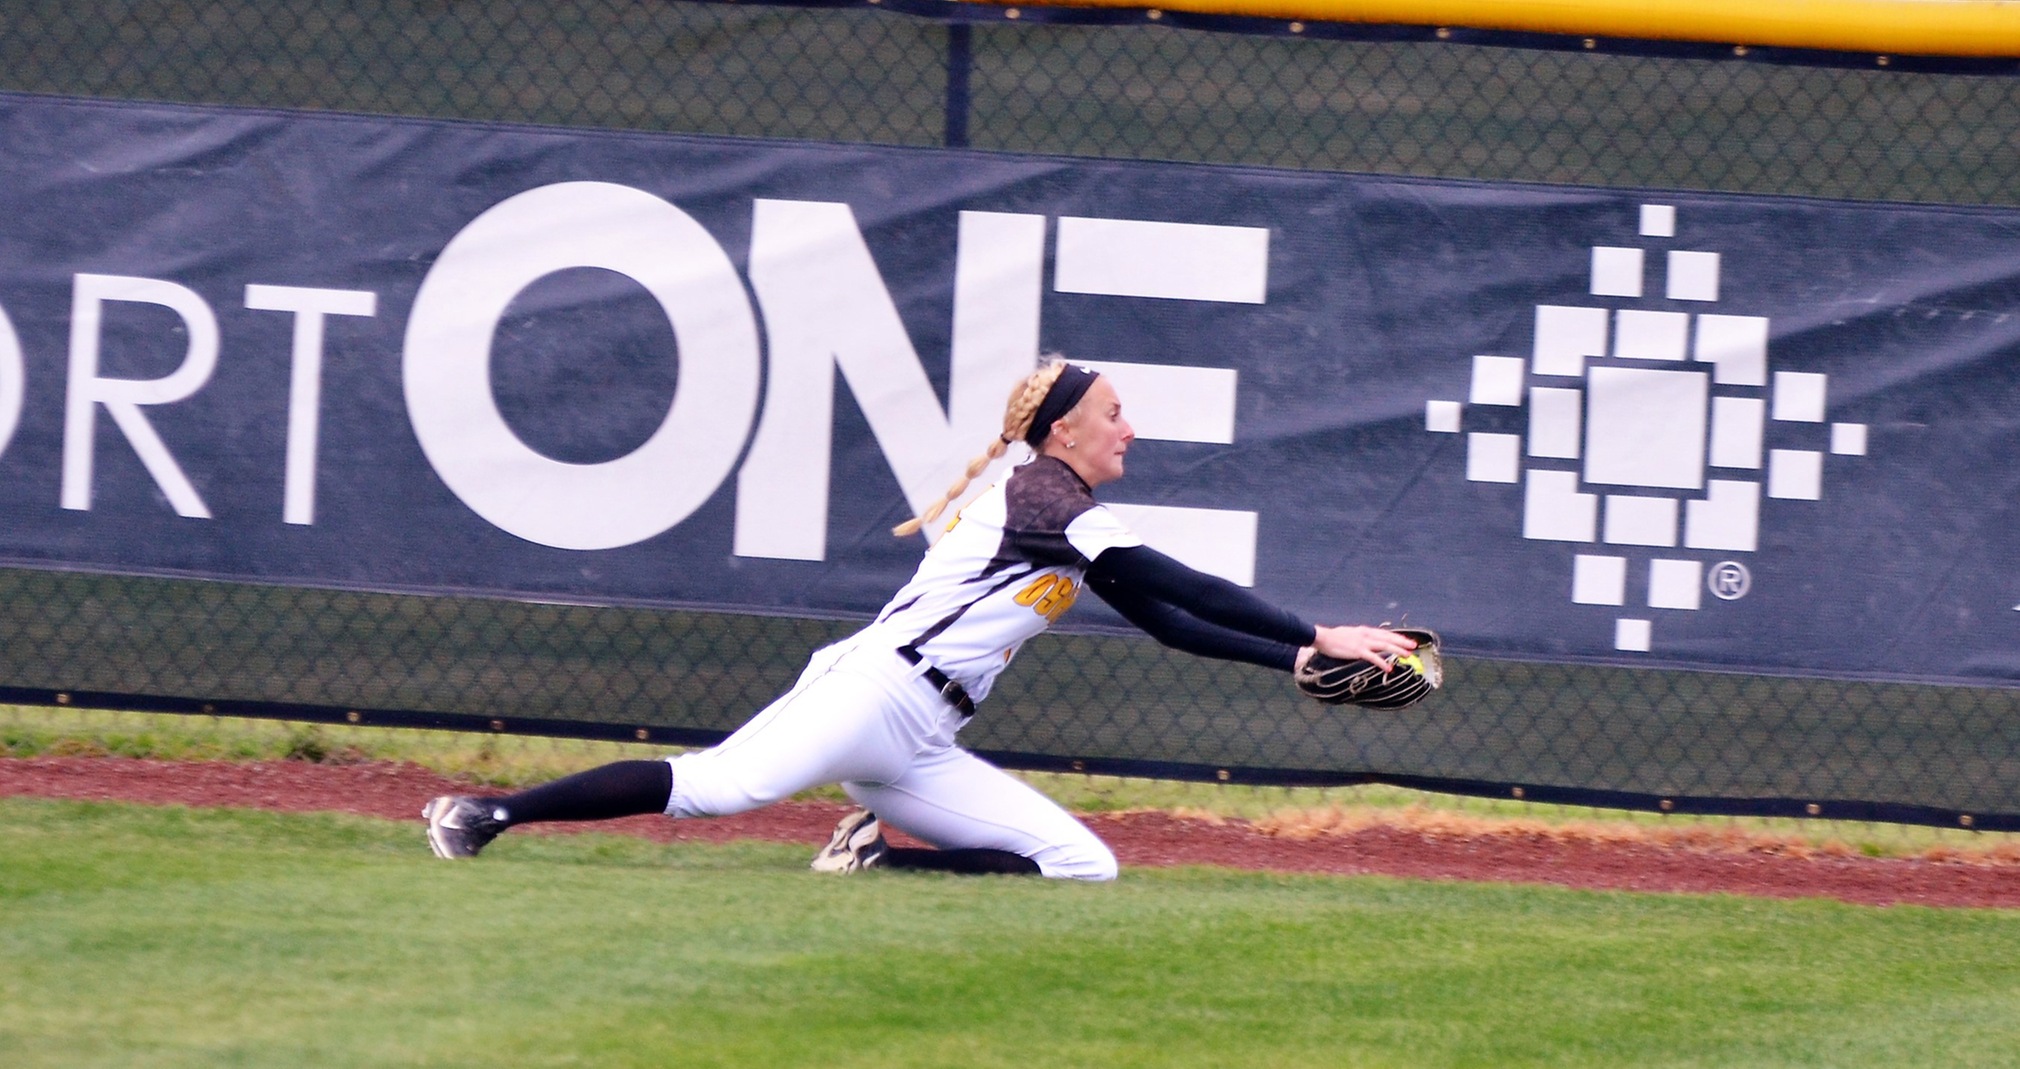 Brianna Witter ends the fifth inning by catching this line drive with the bases loaded.